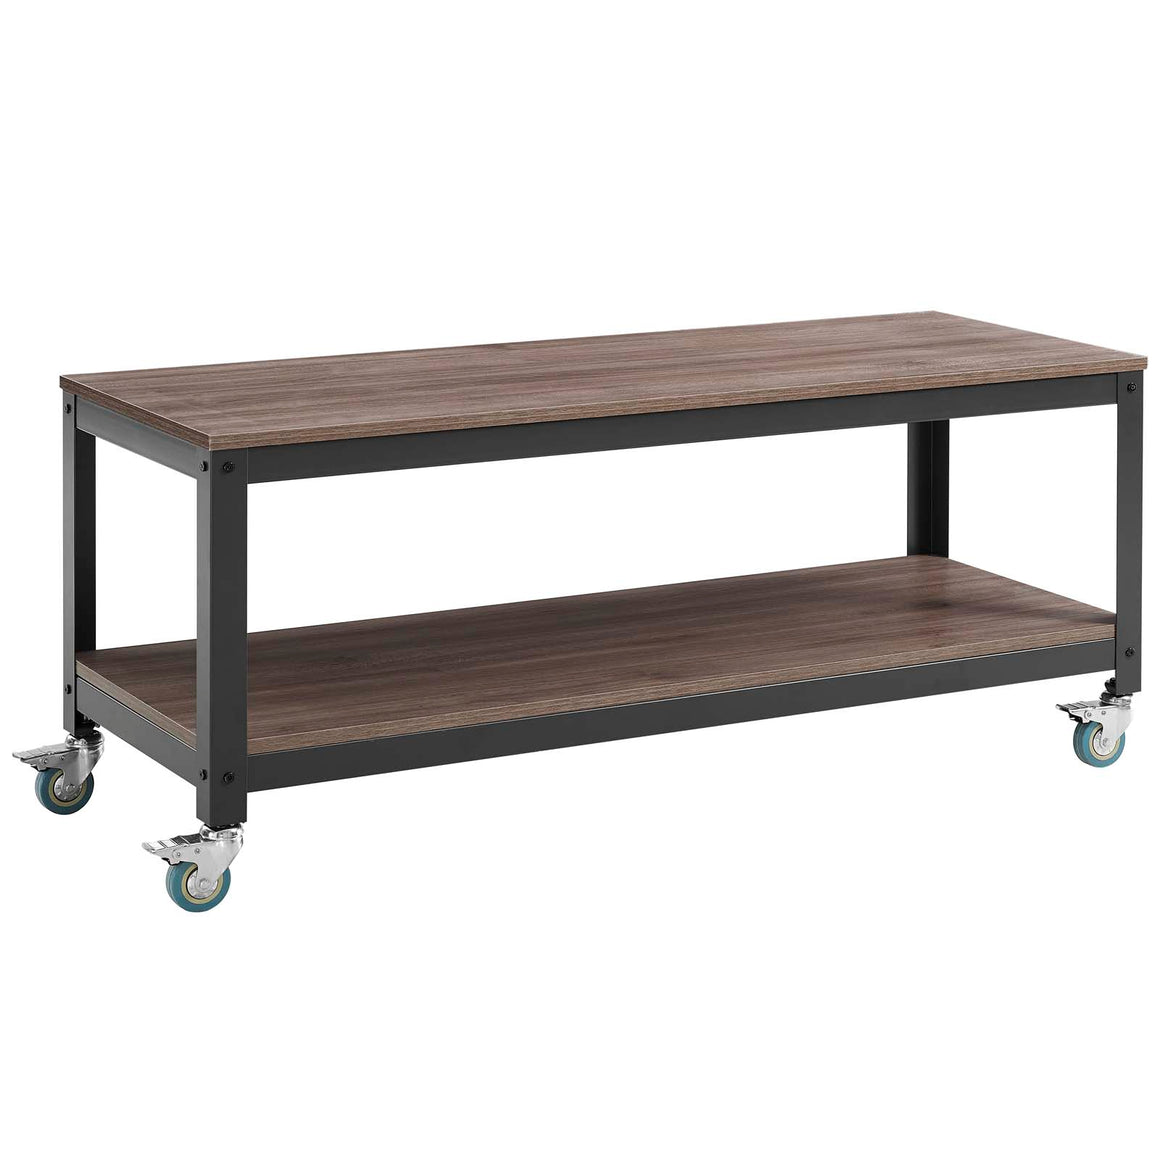 Vivify Tiered Serving or TV Stand Gray Walnut